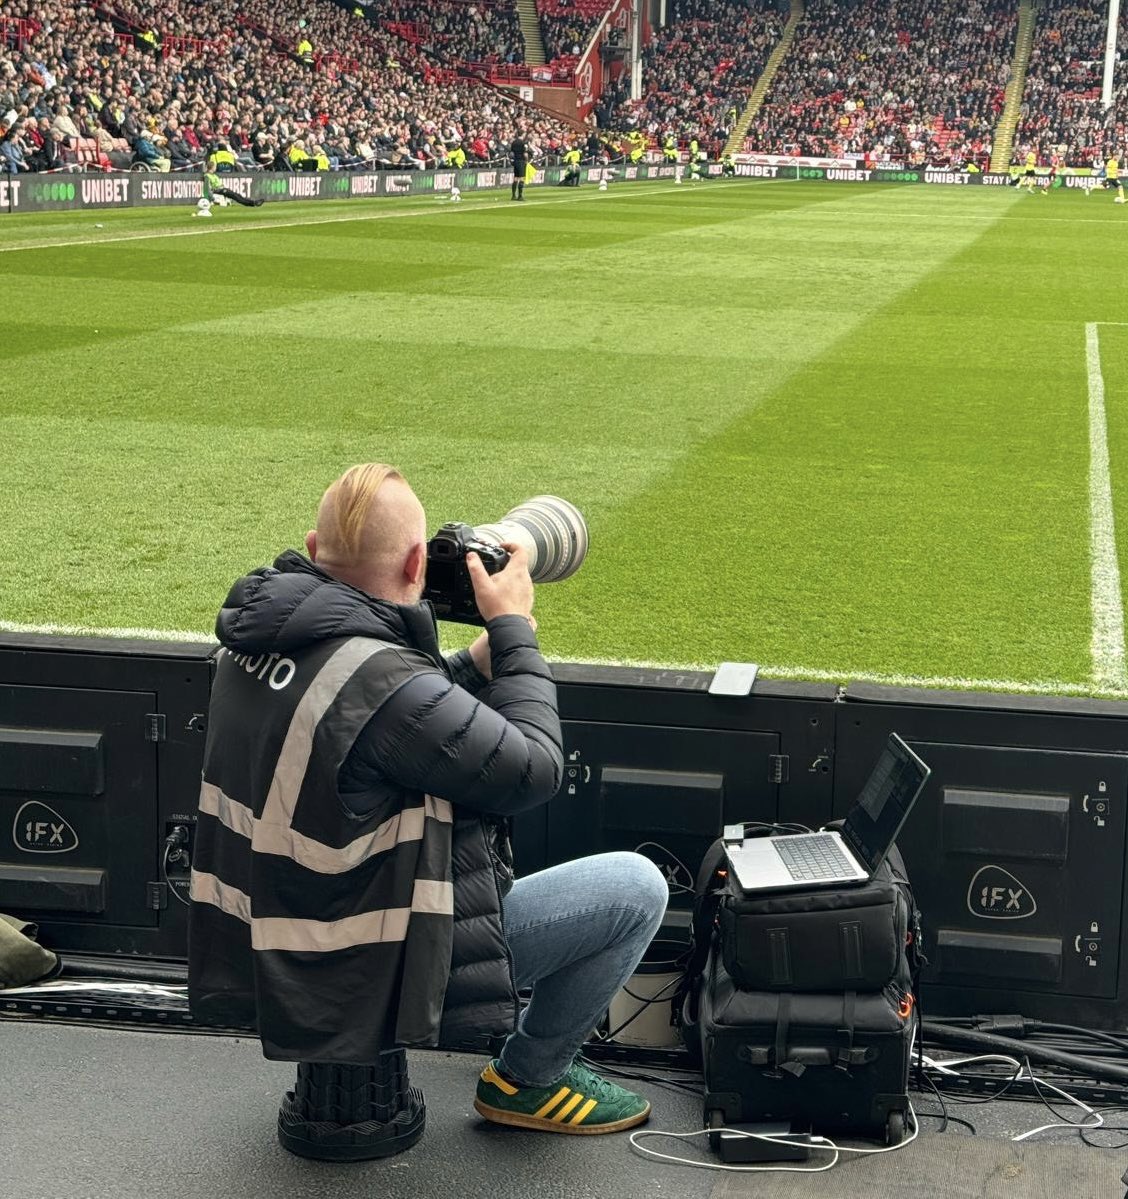 Snapped by Burnley fan, Will Irvine. Man at work.